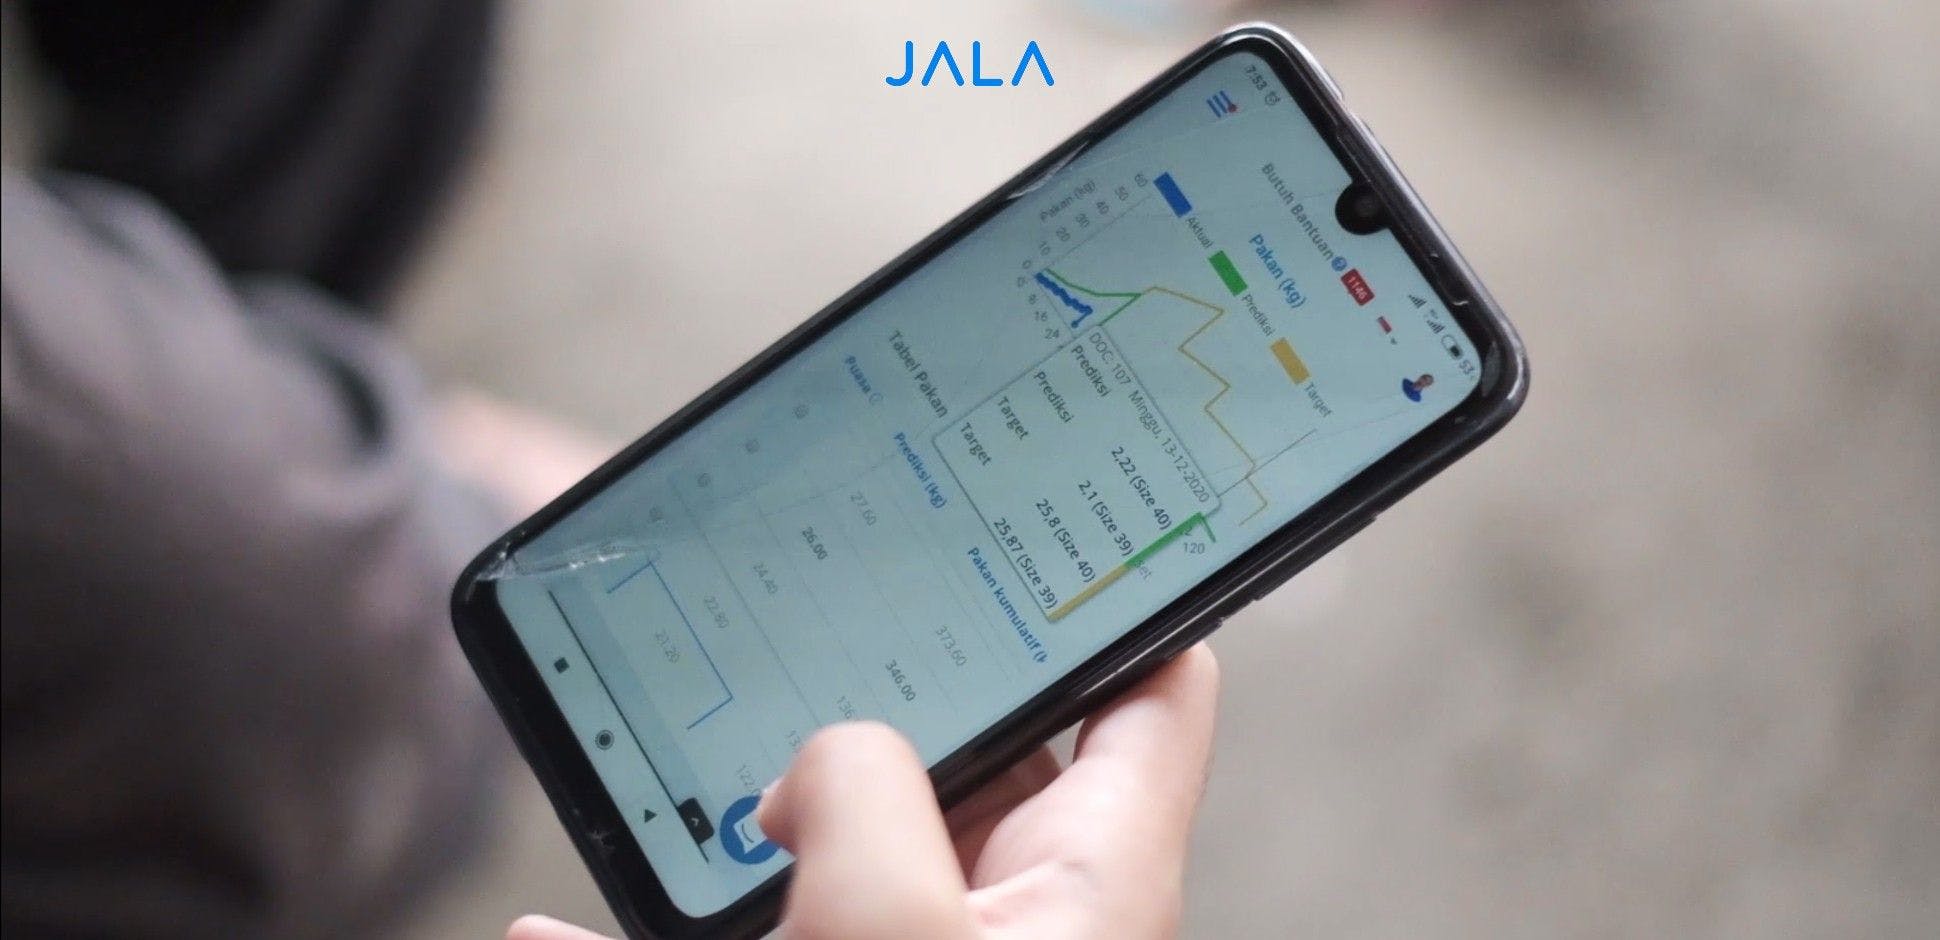 10+ Terms You Can Find on the JALA App Dashboard and Their Definitions